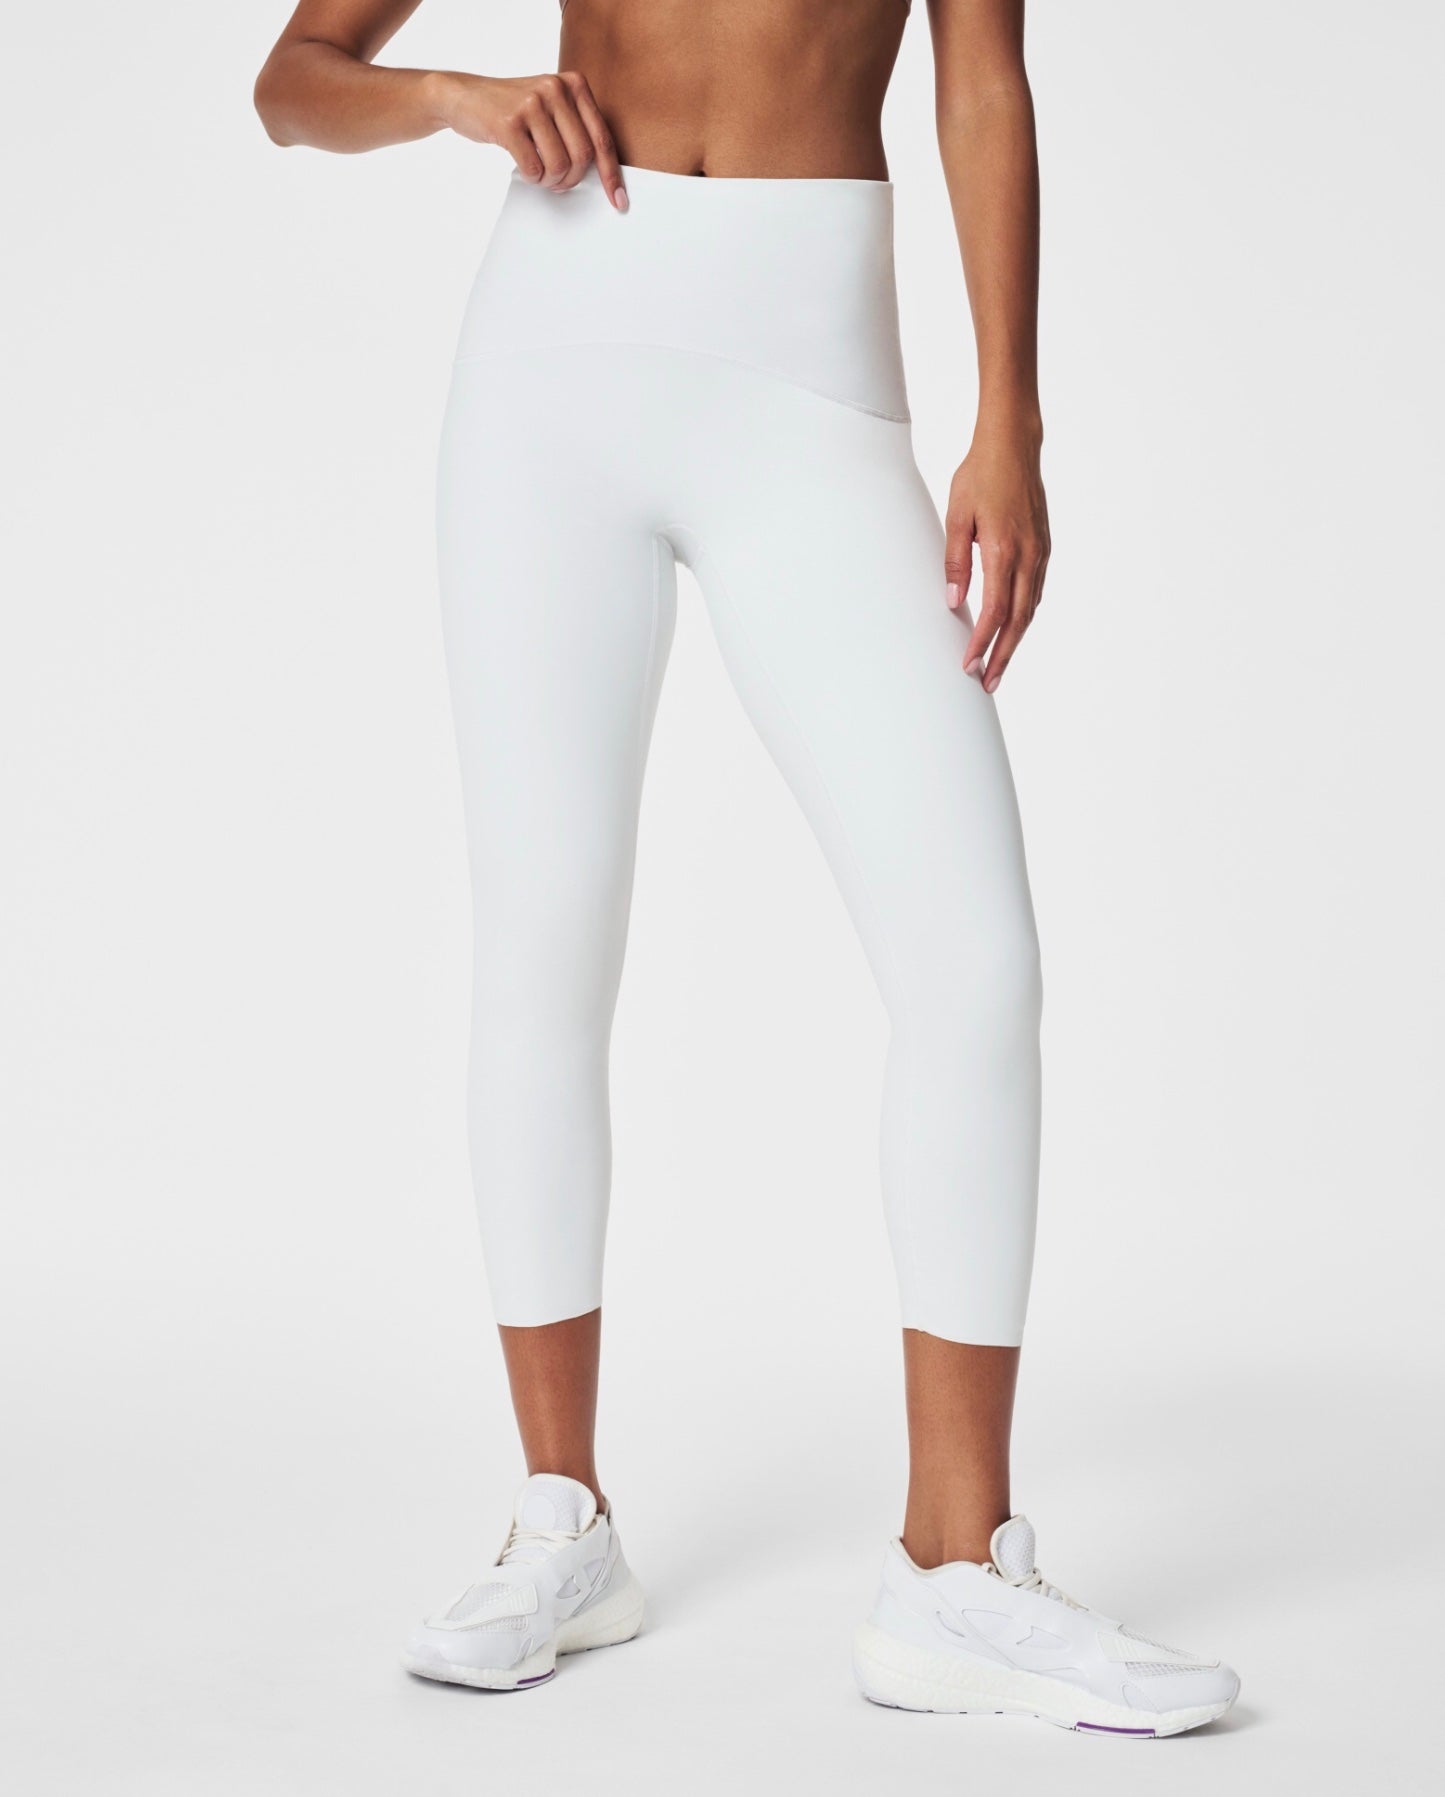 Spanx: BB 7/8 Ultimate Opacity in Vivid White 50427R – The Vogue Boutique